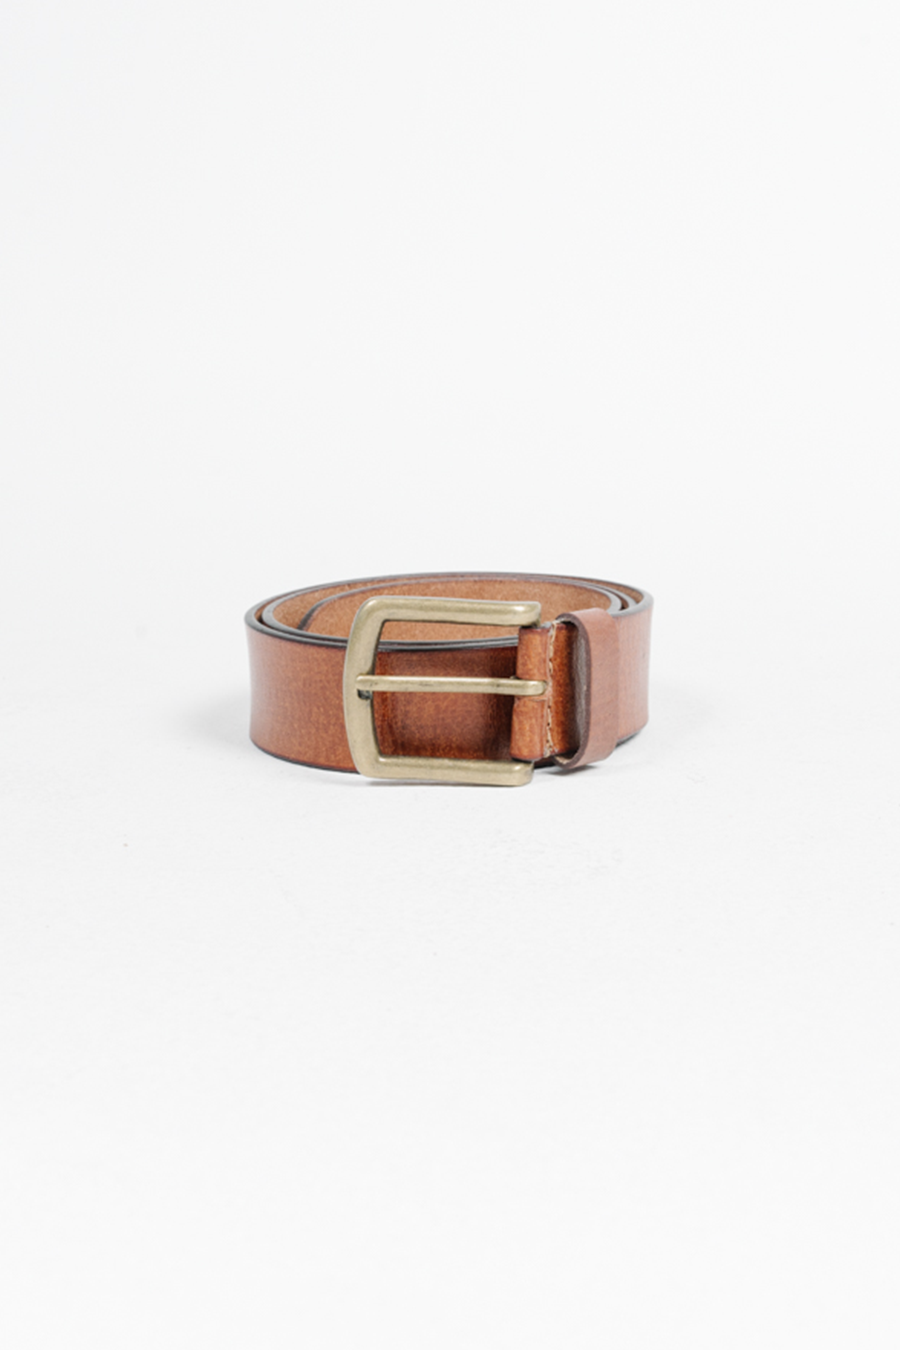 Wide Leather Belt | Tan - Main Image Number 1 of 2